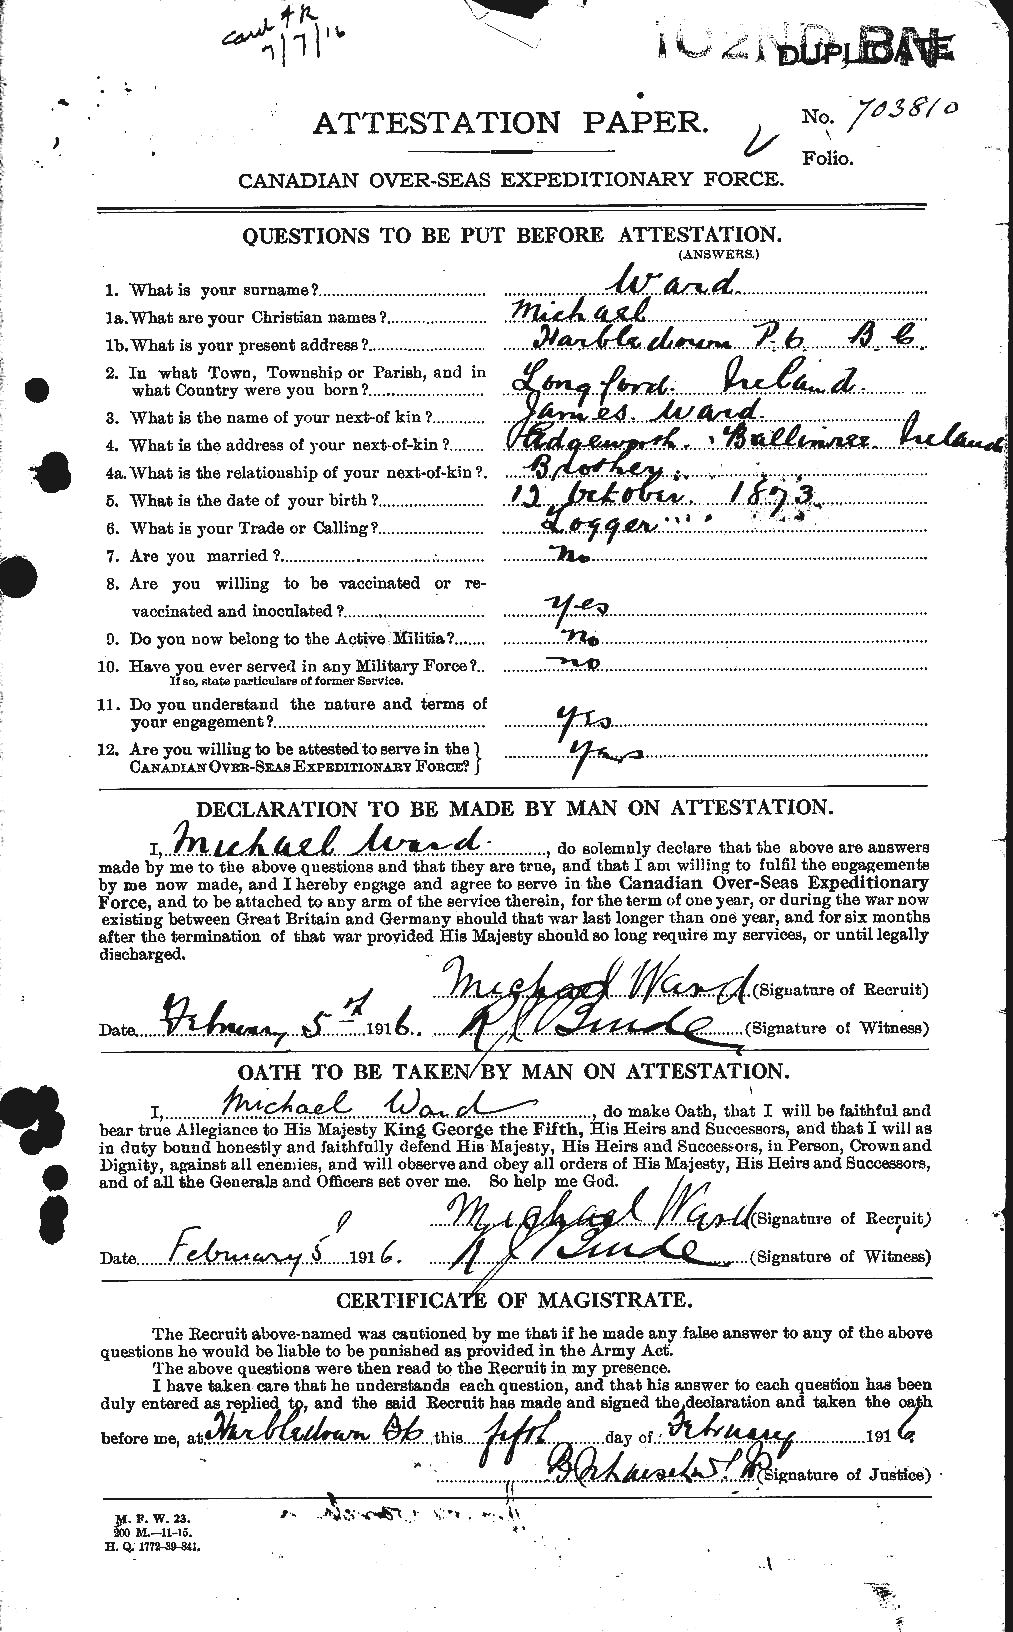 Personnel Records of the First World War - CEF 659603a